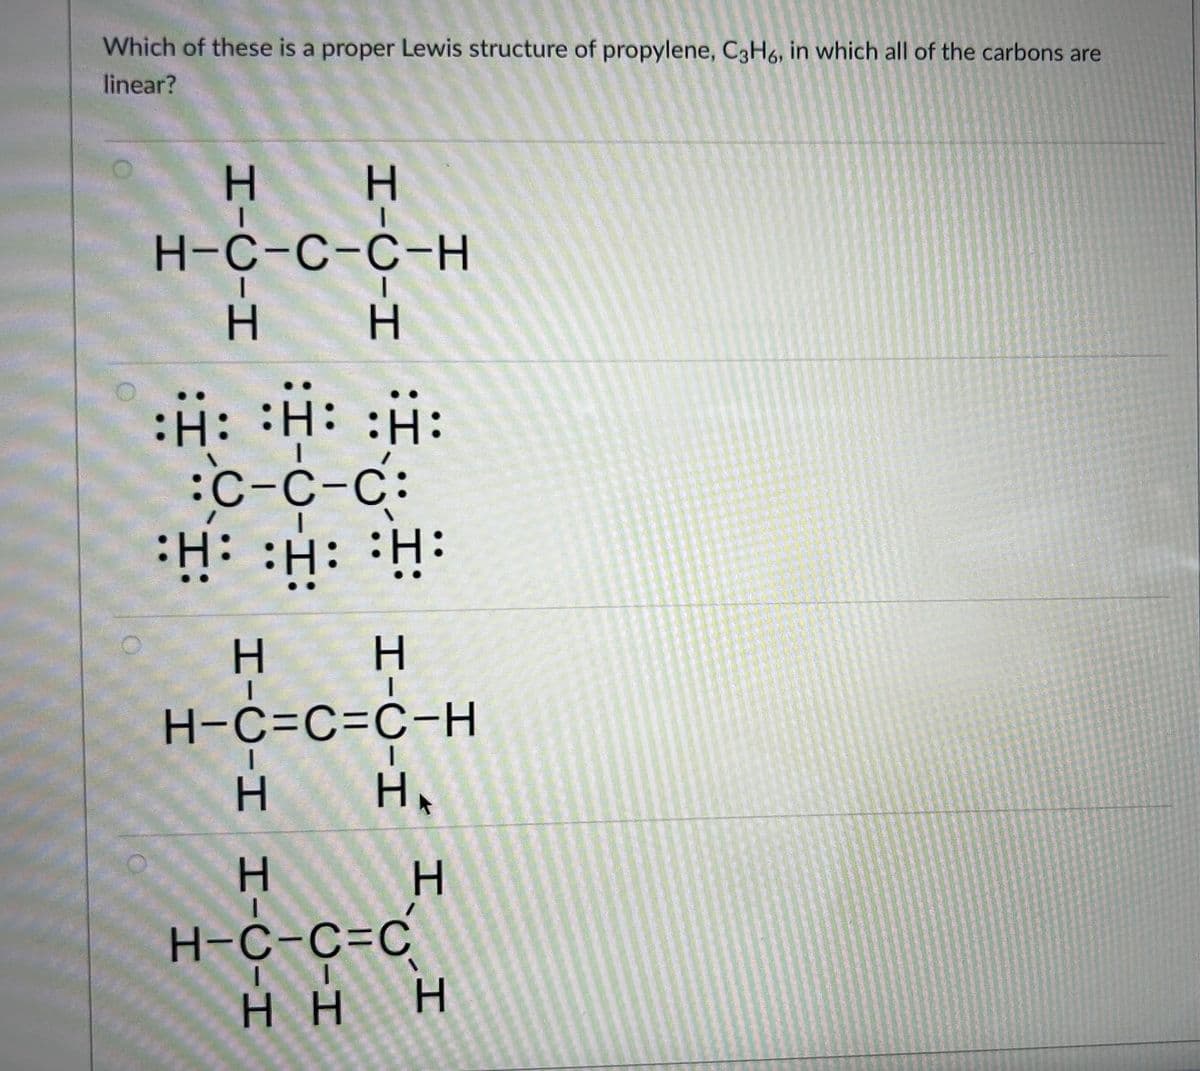 Which of these is a proper Lewis structure of propylene, C3H6, in which all of the carbons are
linear?
H
H
H-C-C-C-H
H
H
:H: H: :H:
:C-C-C:
•H: :H: •H
H-C-H H-C-H
HIC-H
Н
H-C=C=C-H
HA
H-C-C=C
H
HH H